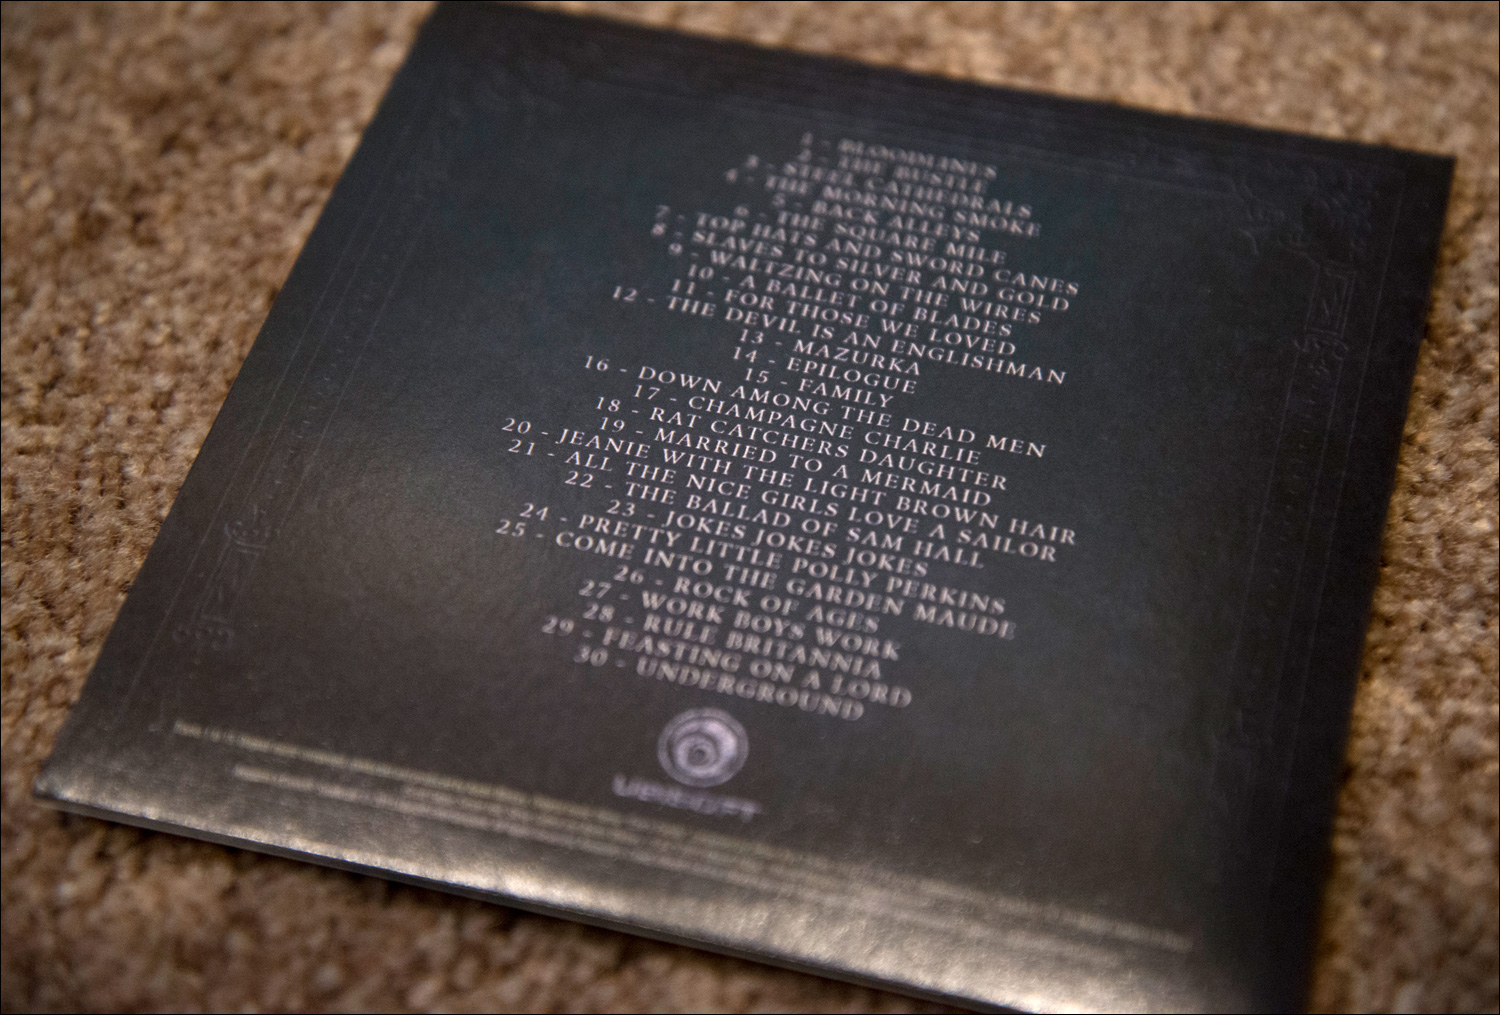 Assassins-Creed-Syndicate-Rooks-Edition-Soundtrack-CD-Tracklist